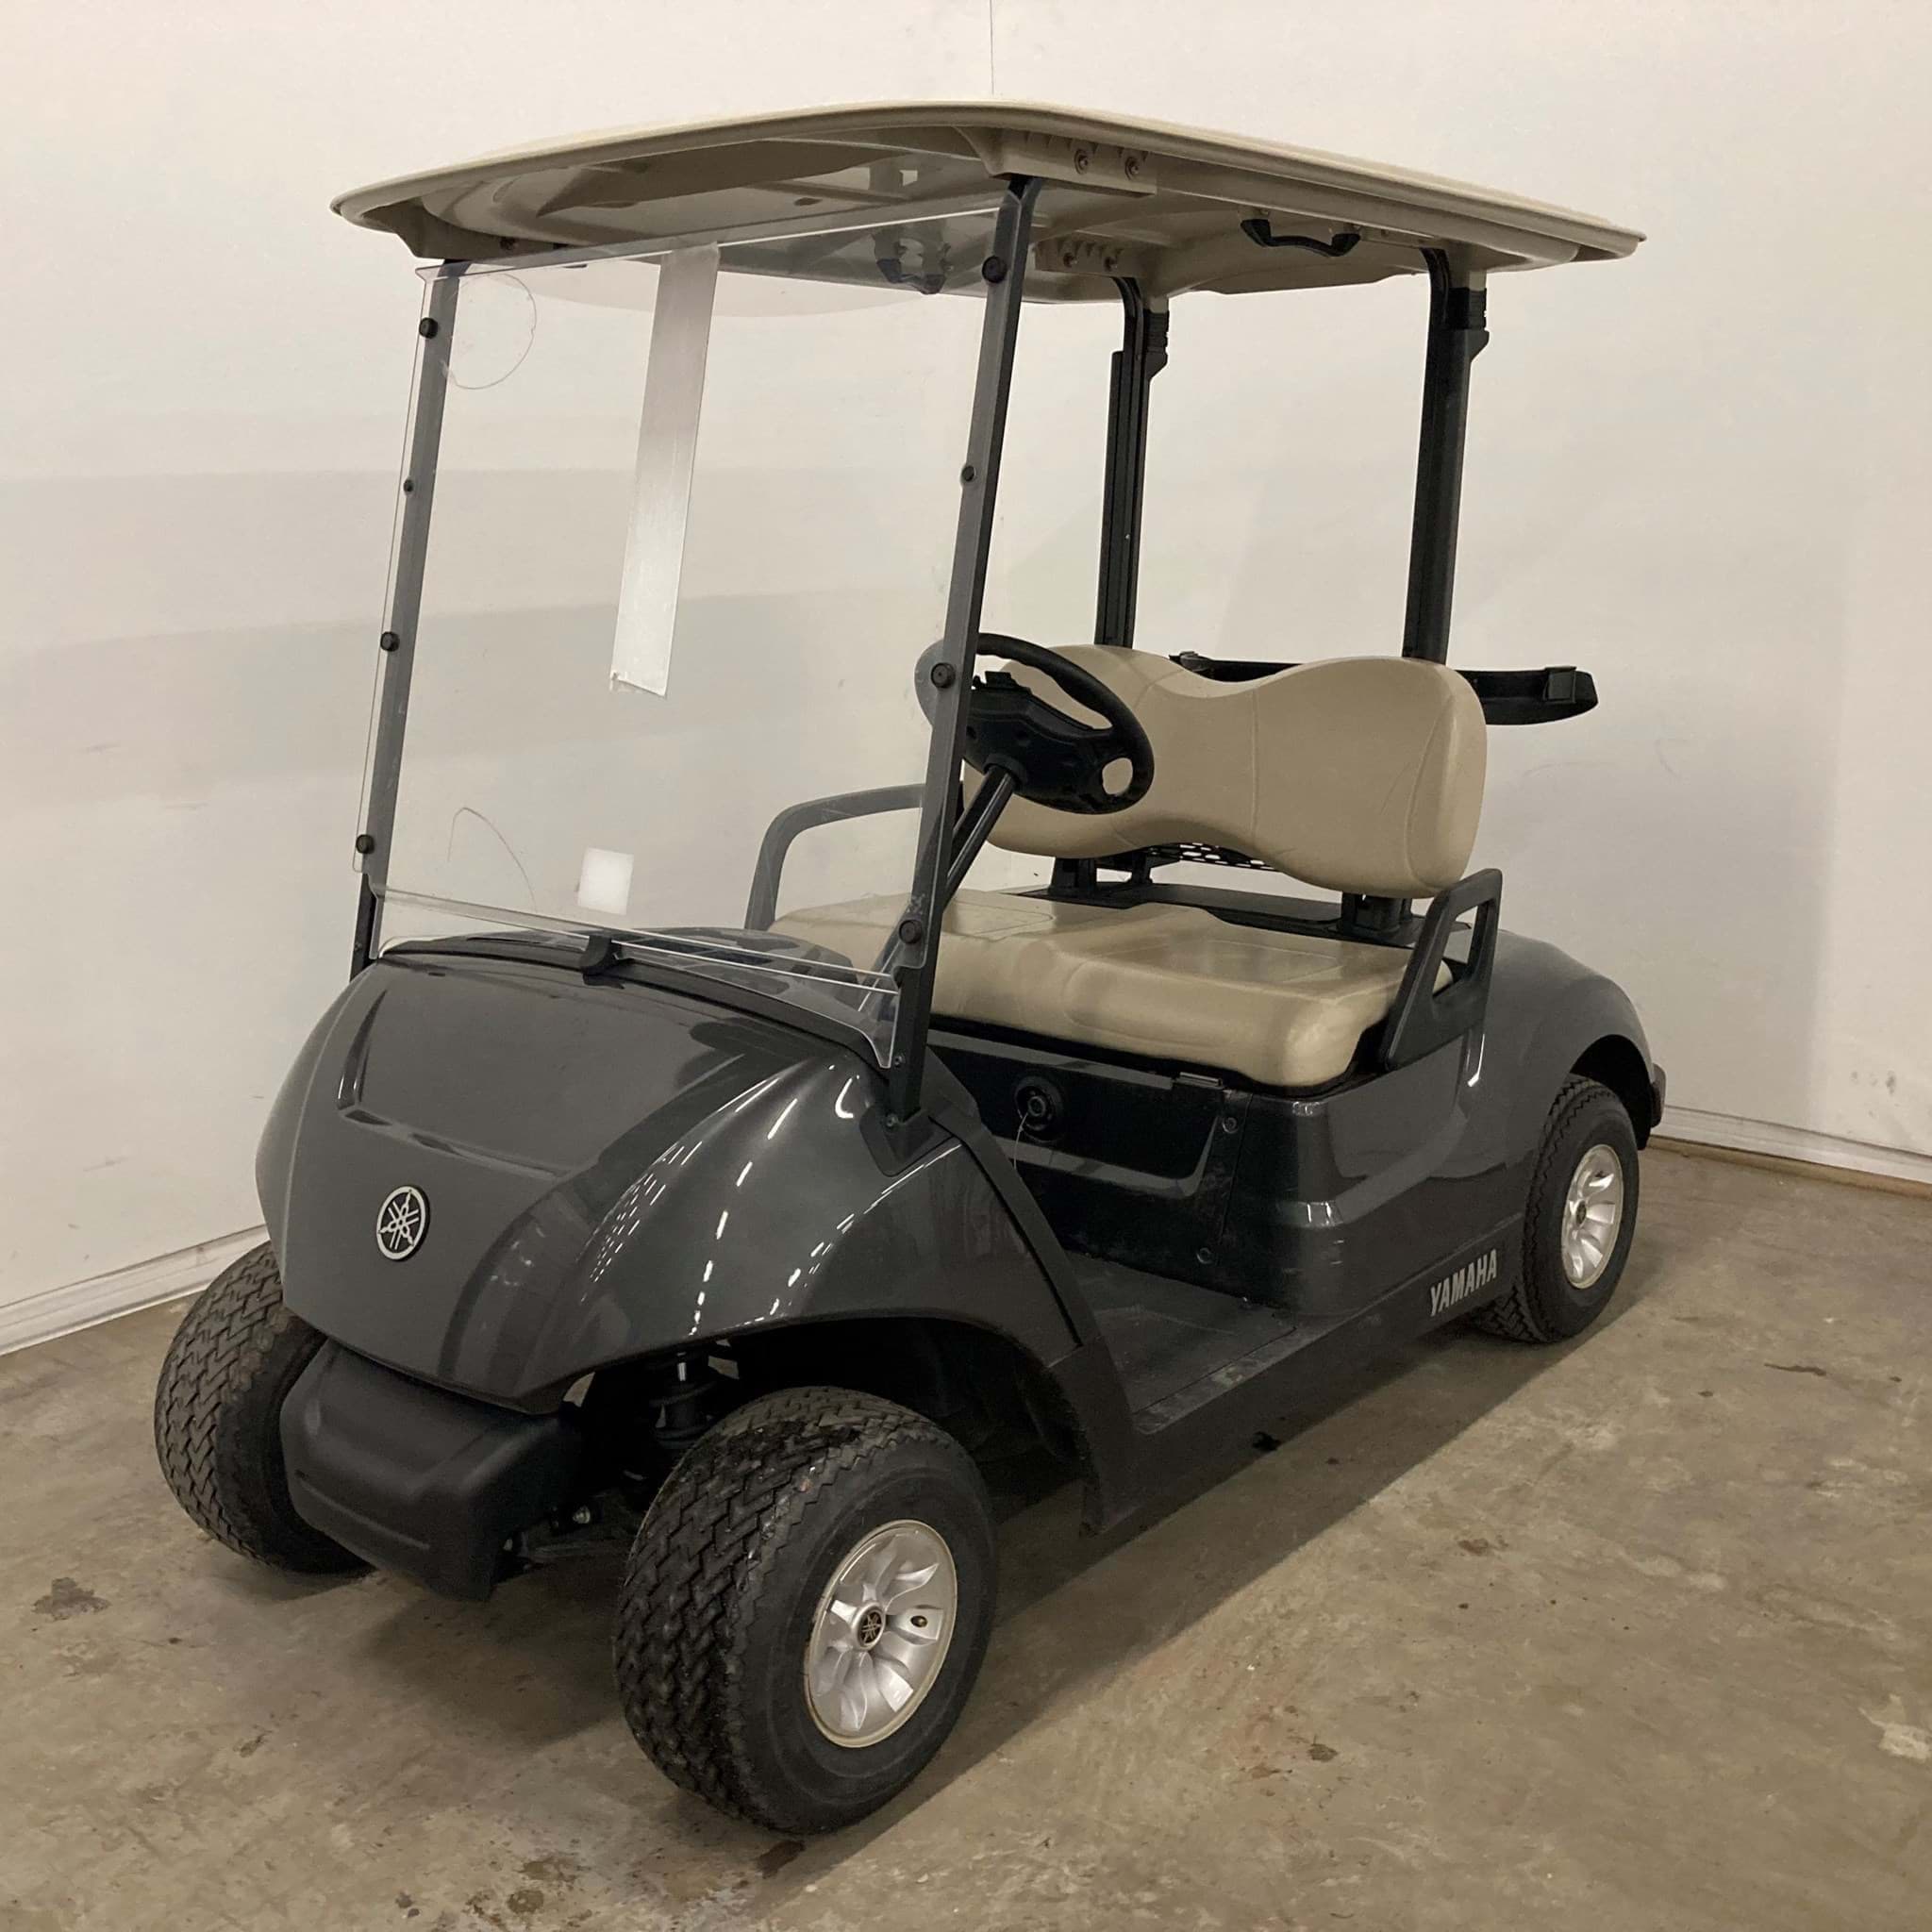 Picture of Trade - 2020 - Electric - Yamaha - Drive2 - 2 Seater - Gray (DC motor)